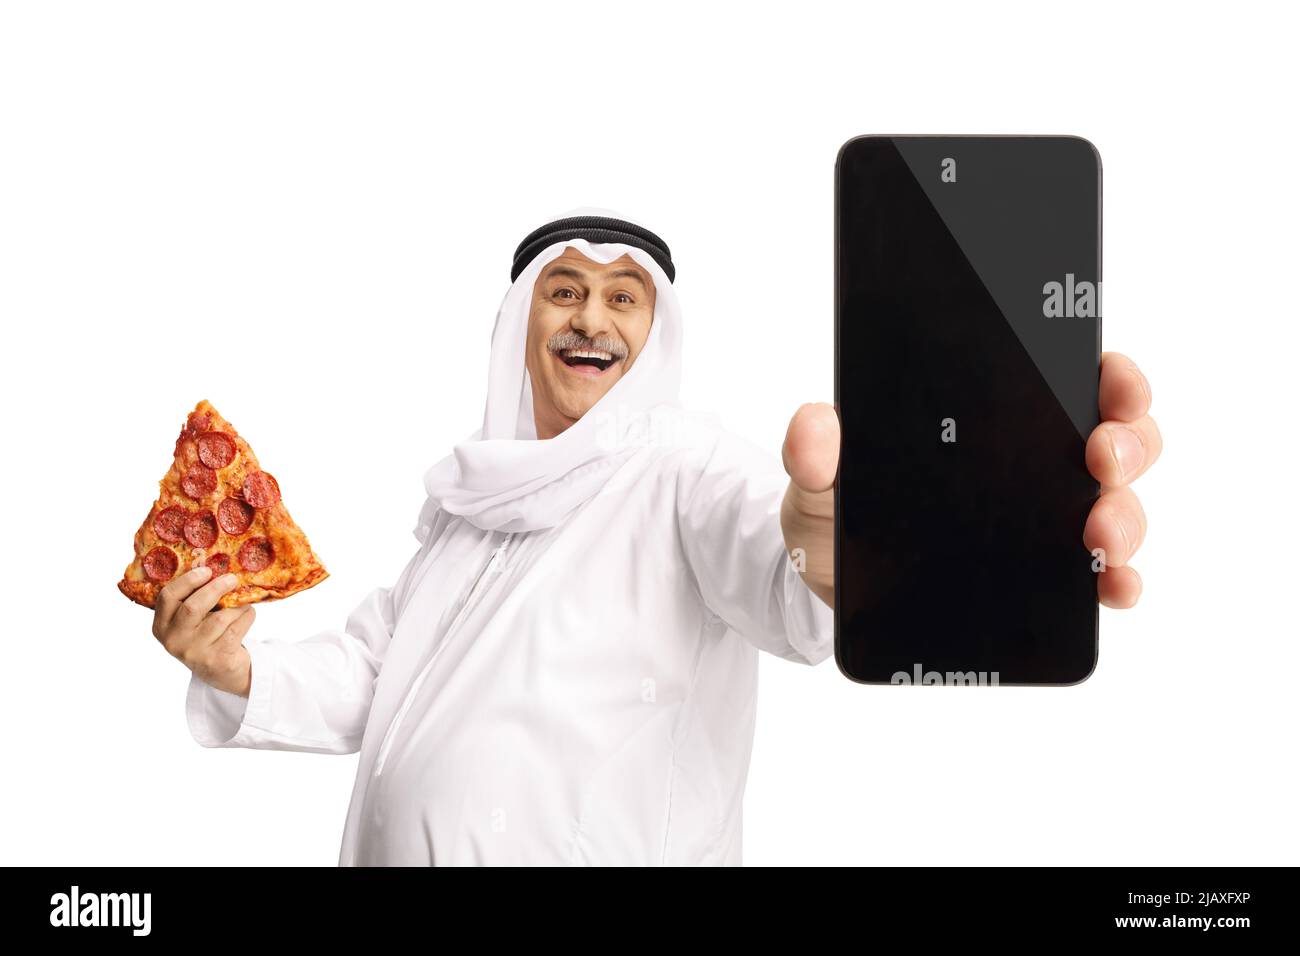 Mature arab man holding pepperoni pizza slice and showing a smartphone isolated on white background Stock Photo